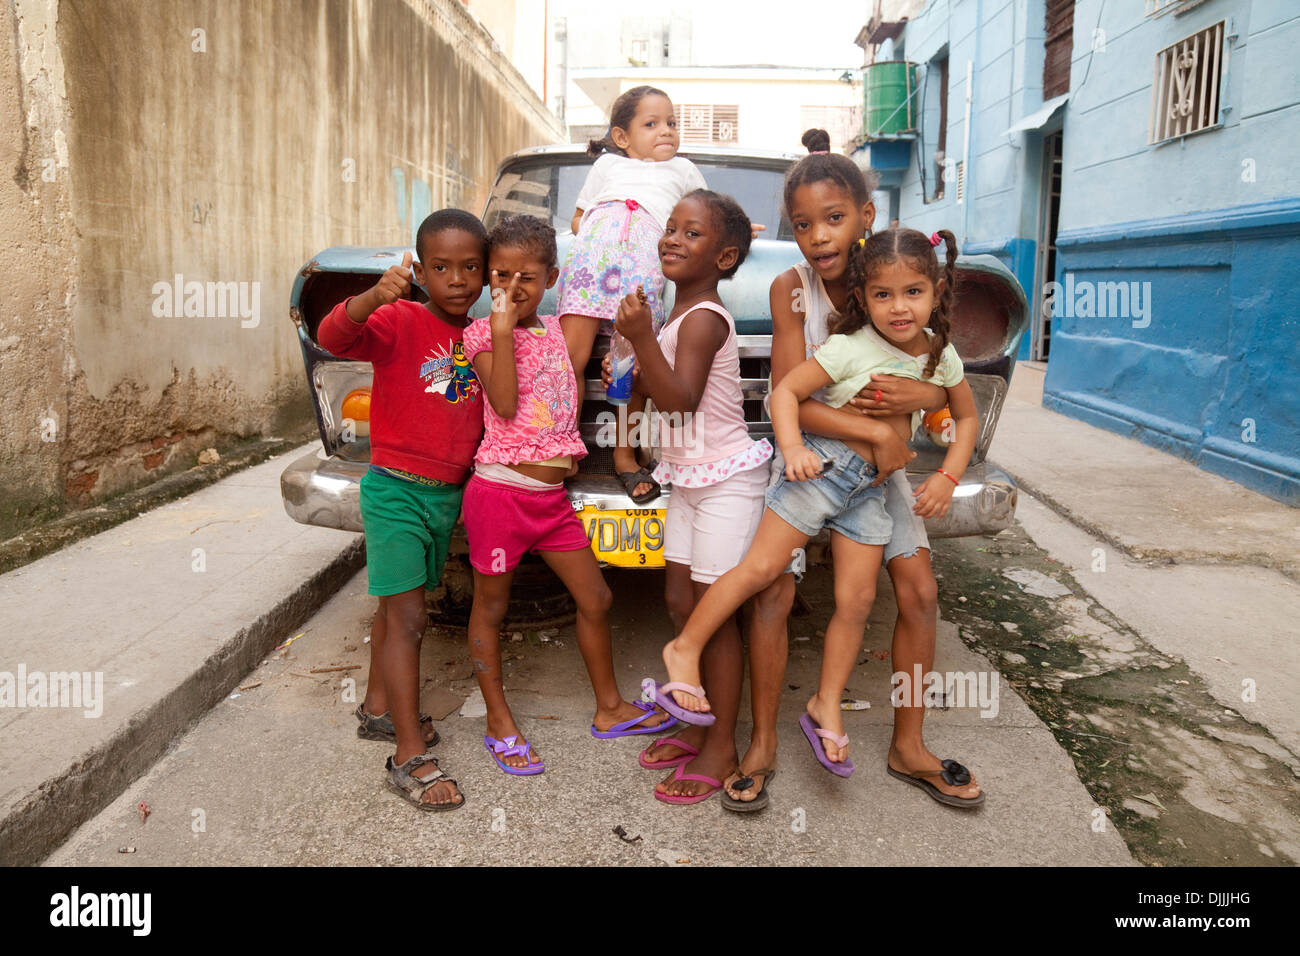 Cuban children playing in a group on the street in a poor area of Havana, Cuba Caribbean Stock Photo